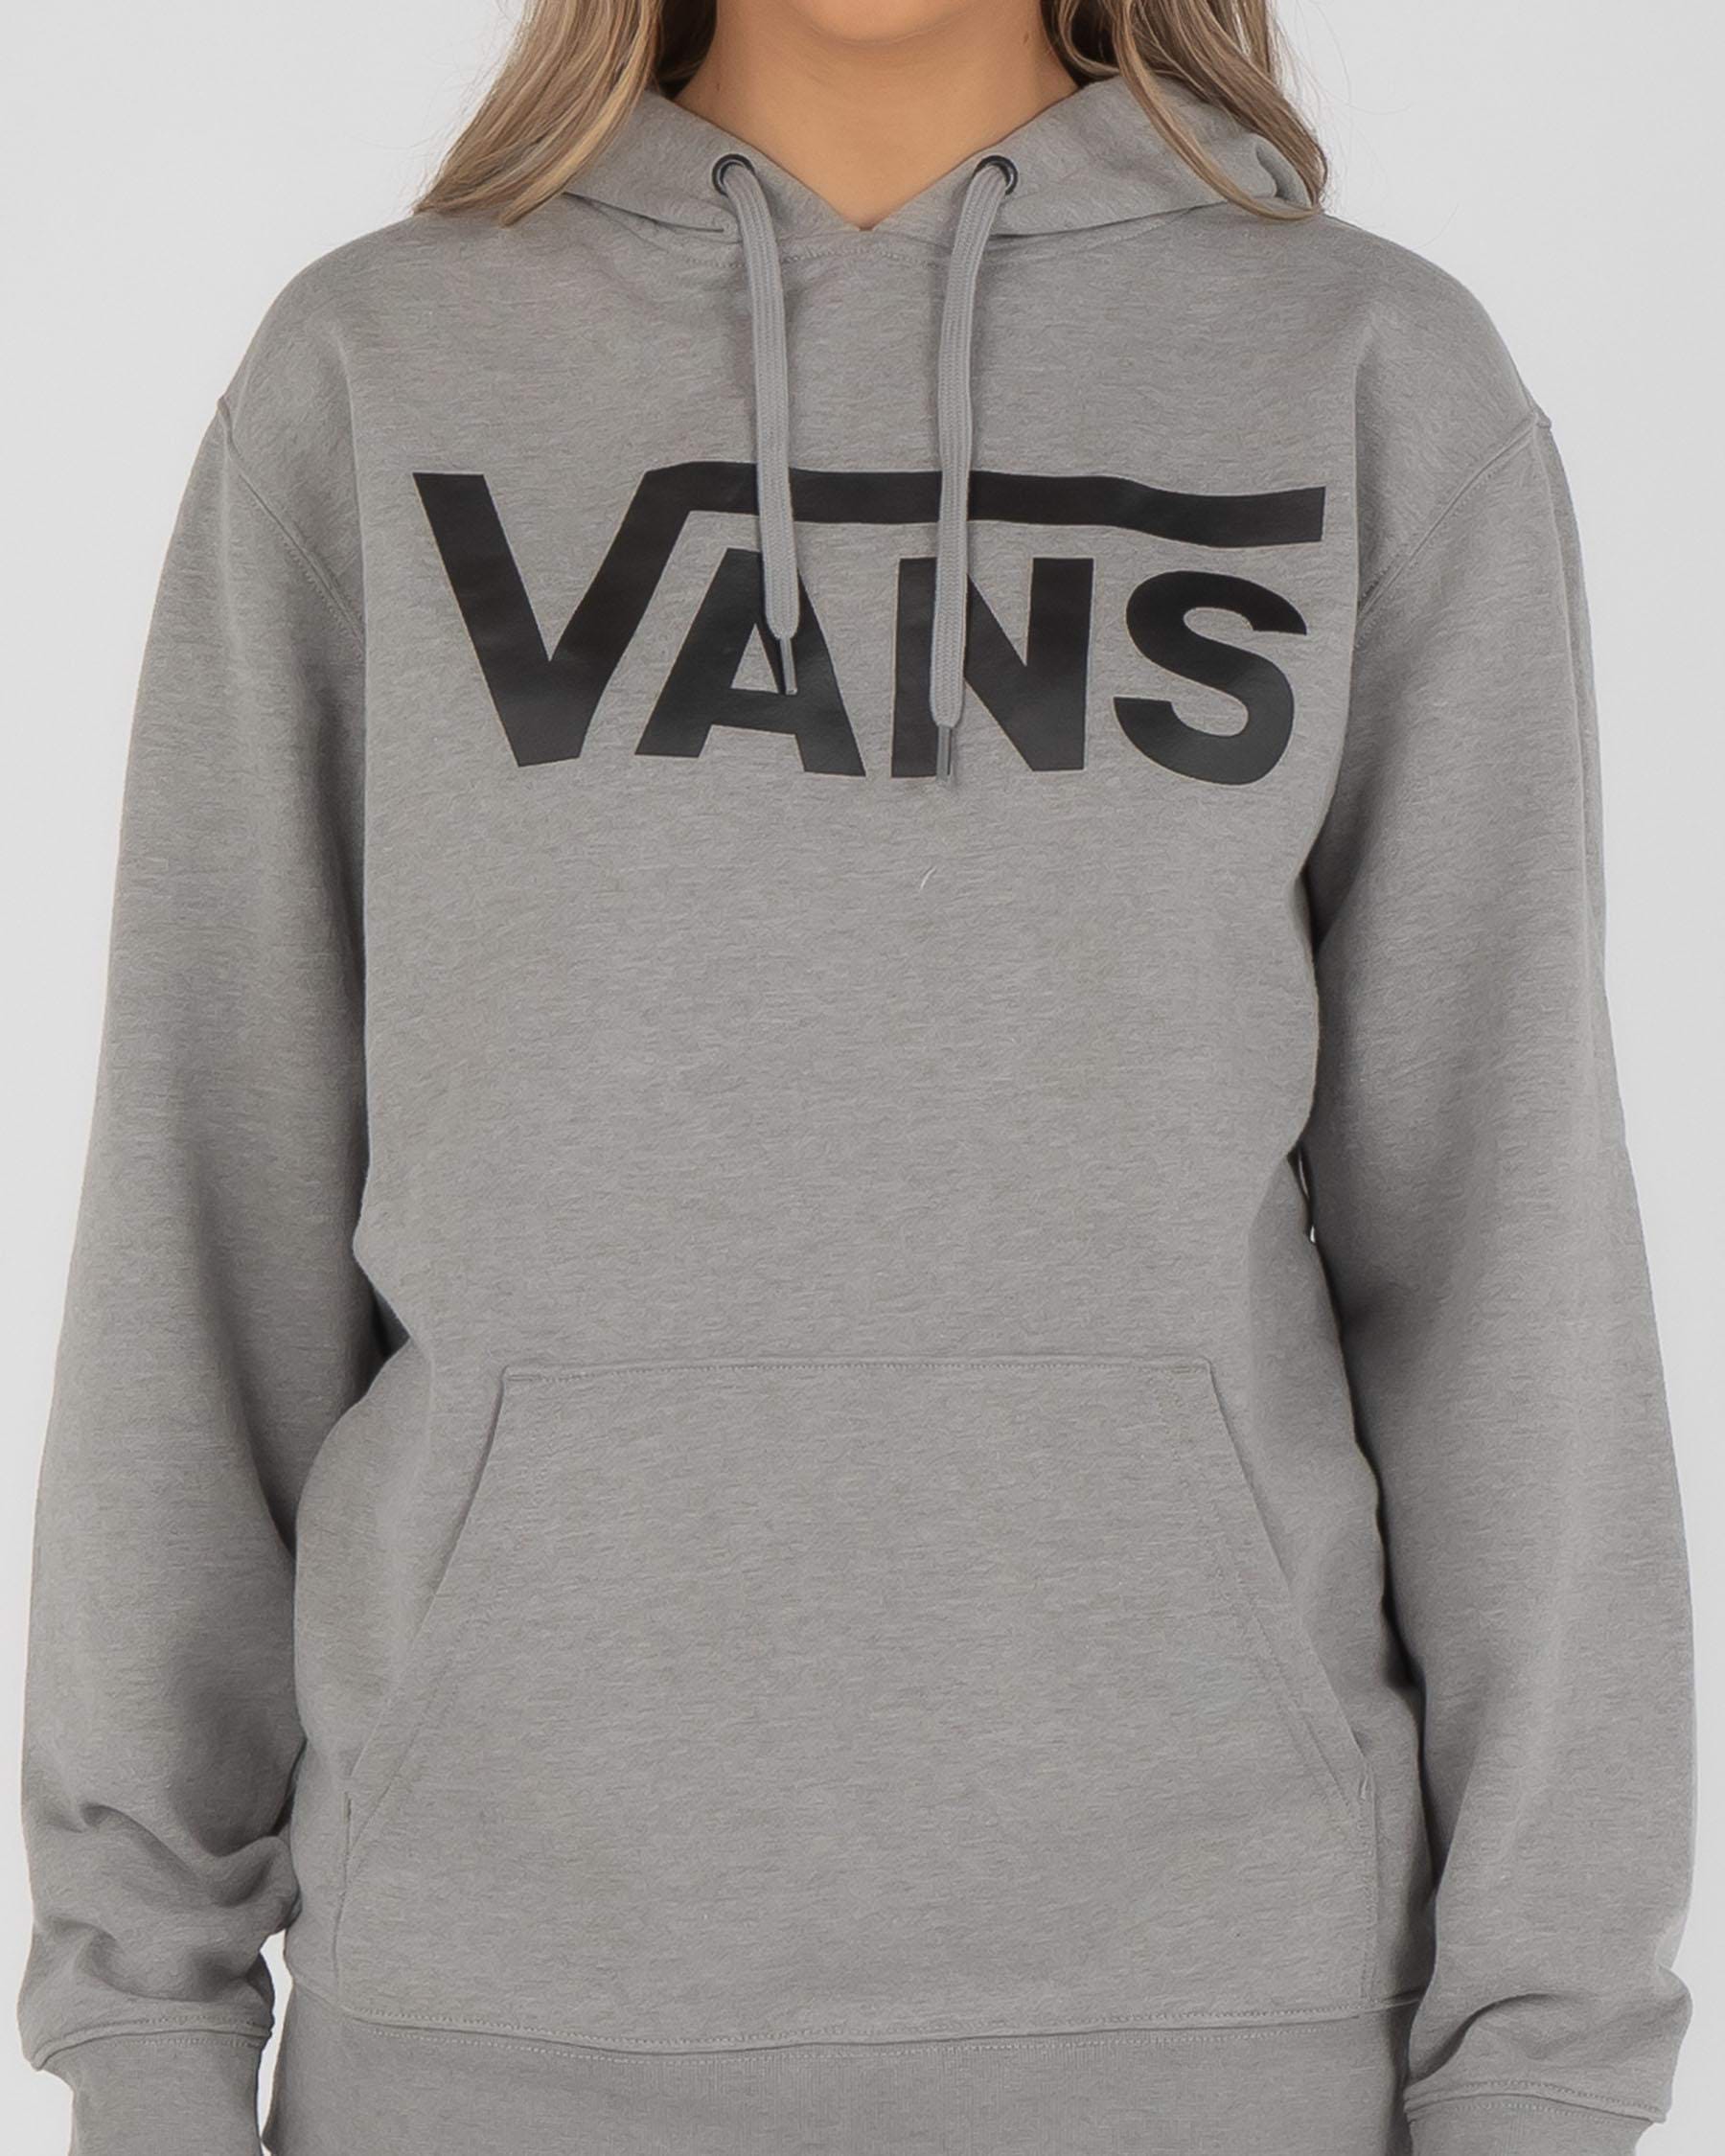 Vans Classic Hoodie In Cement Heather / Black - Fast Shipping & Easy ...